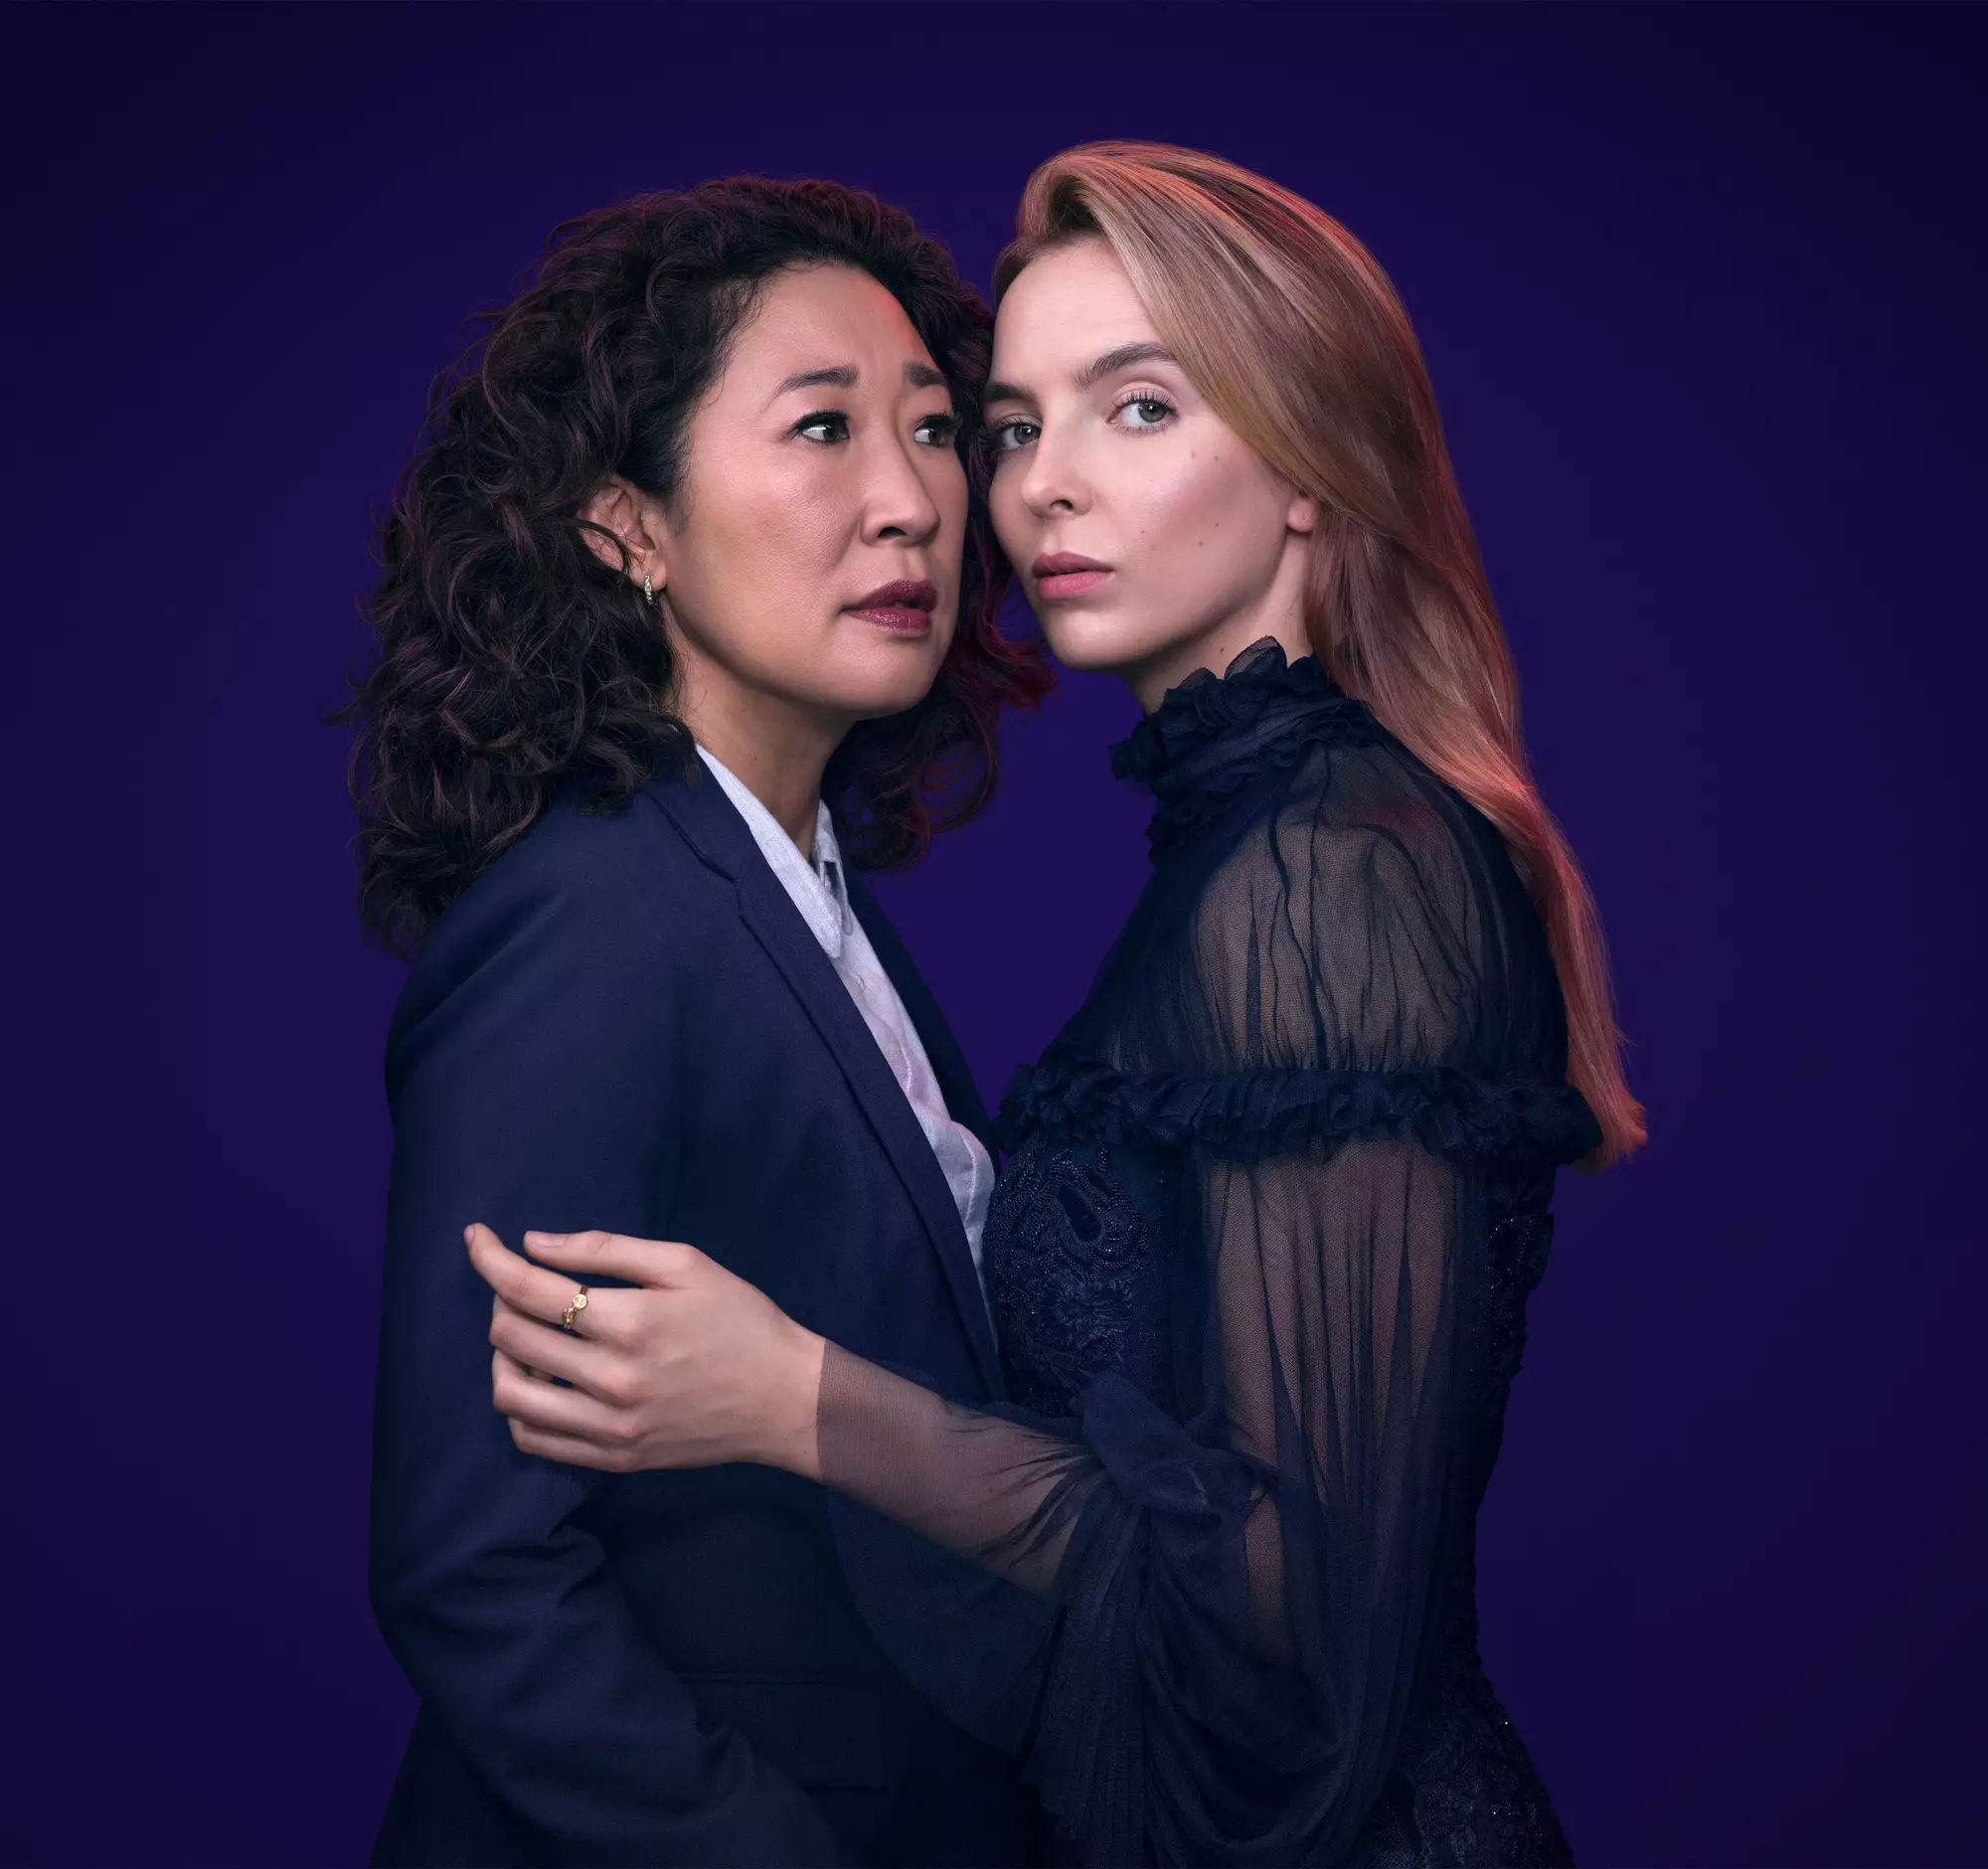 In the closing moments of Season 2 of Killing Eve Sandra Oh's character Eve Polastri (left) was shot by Villanelle (